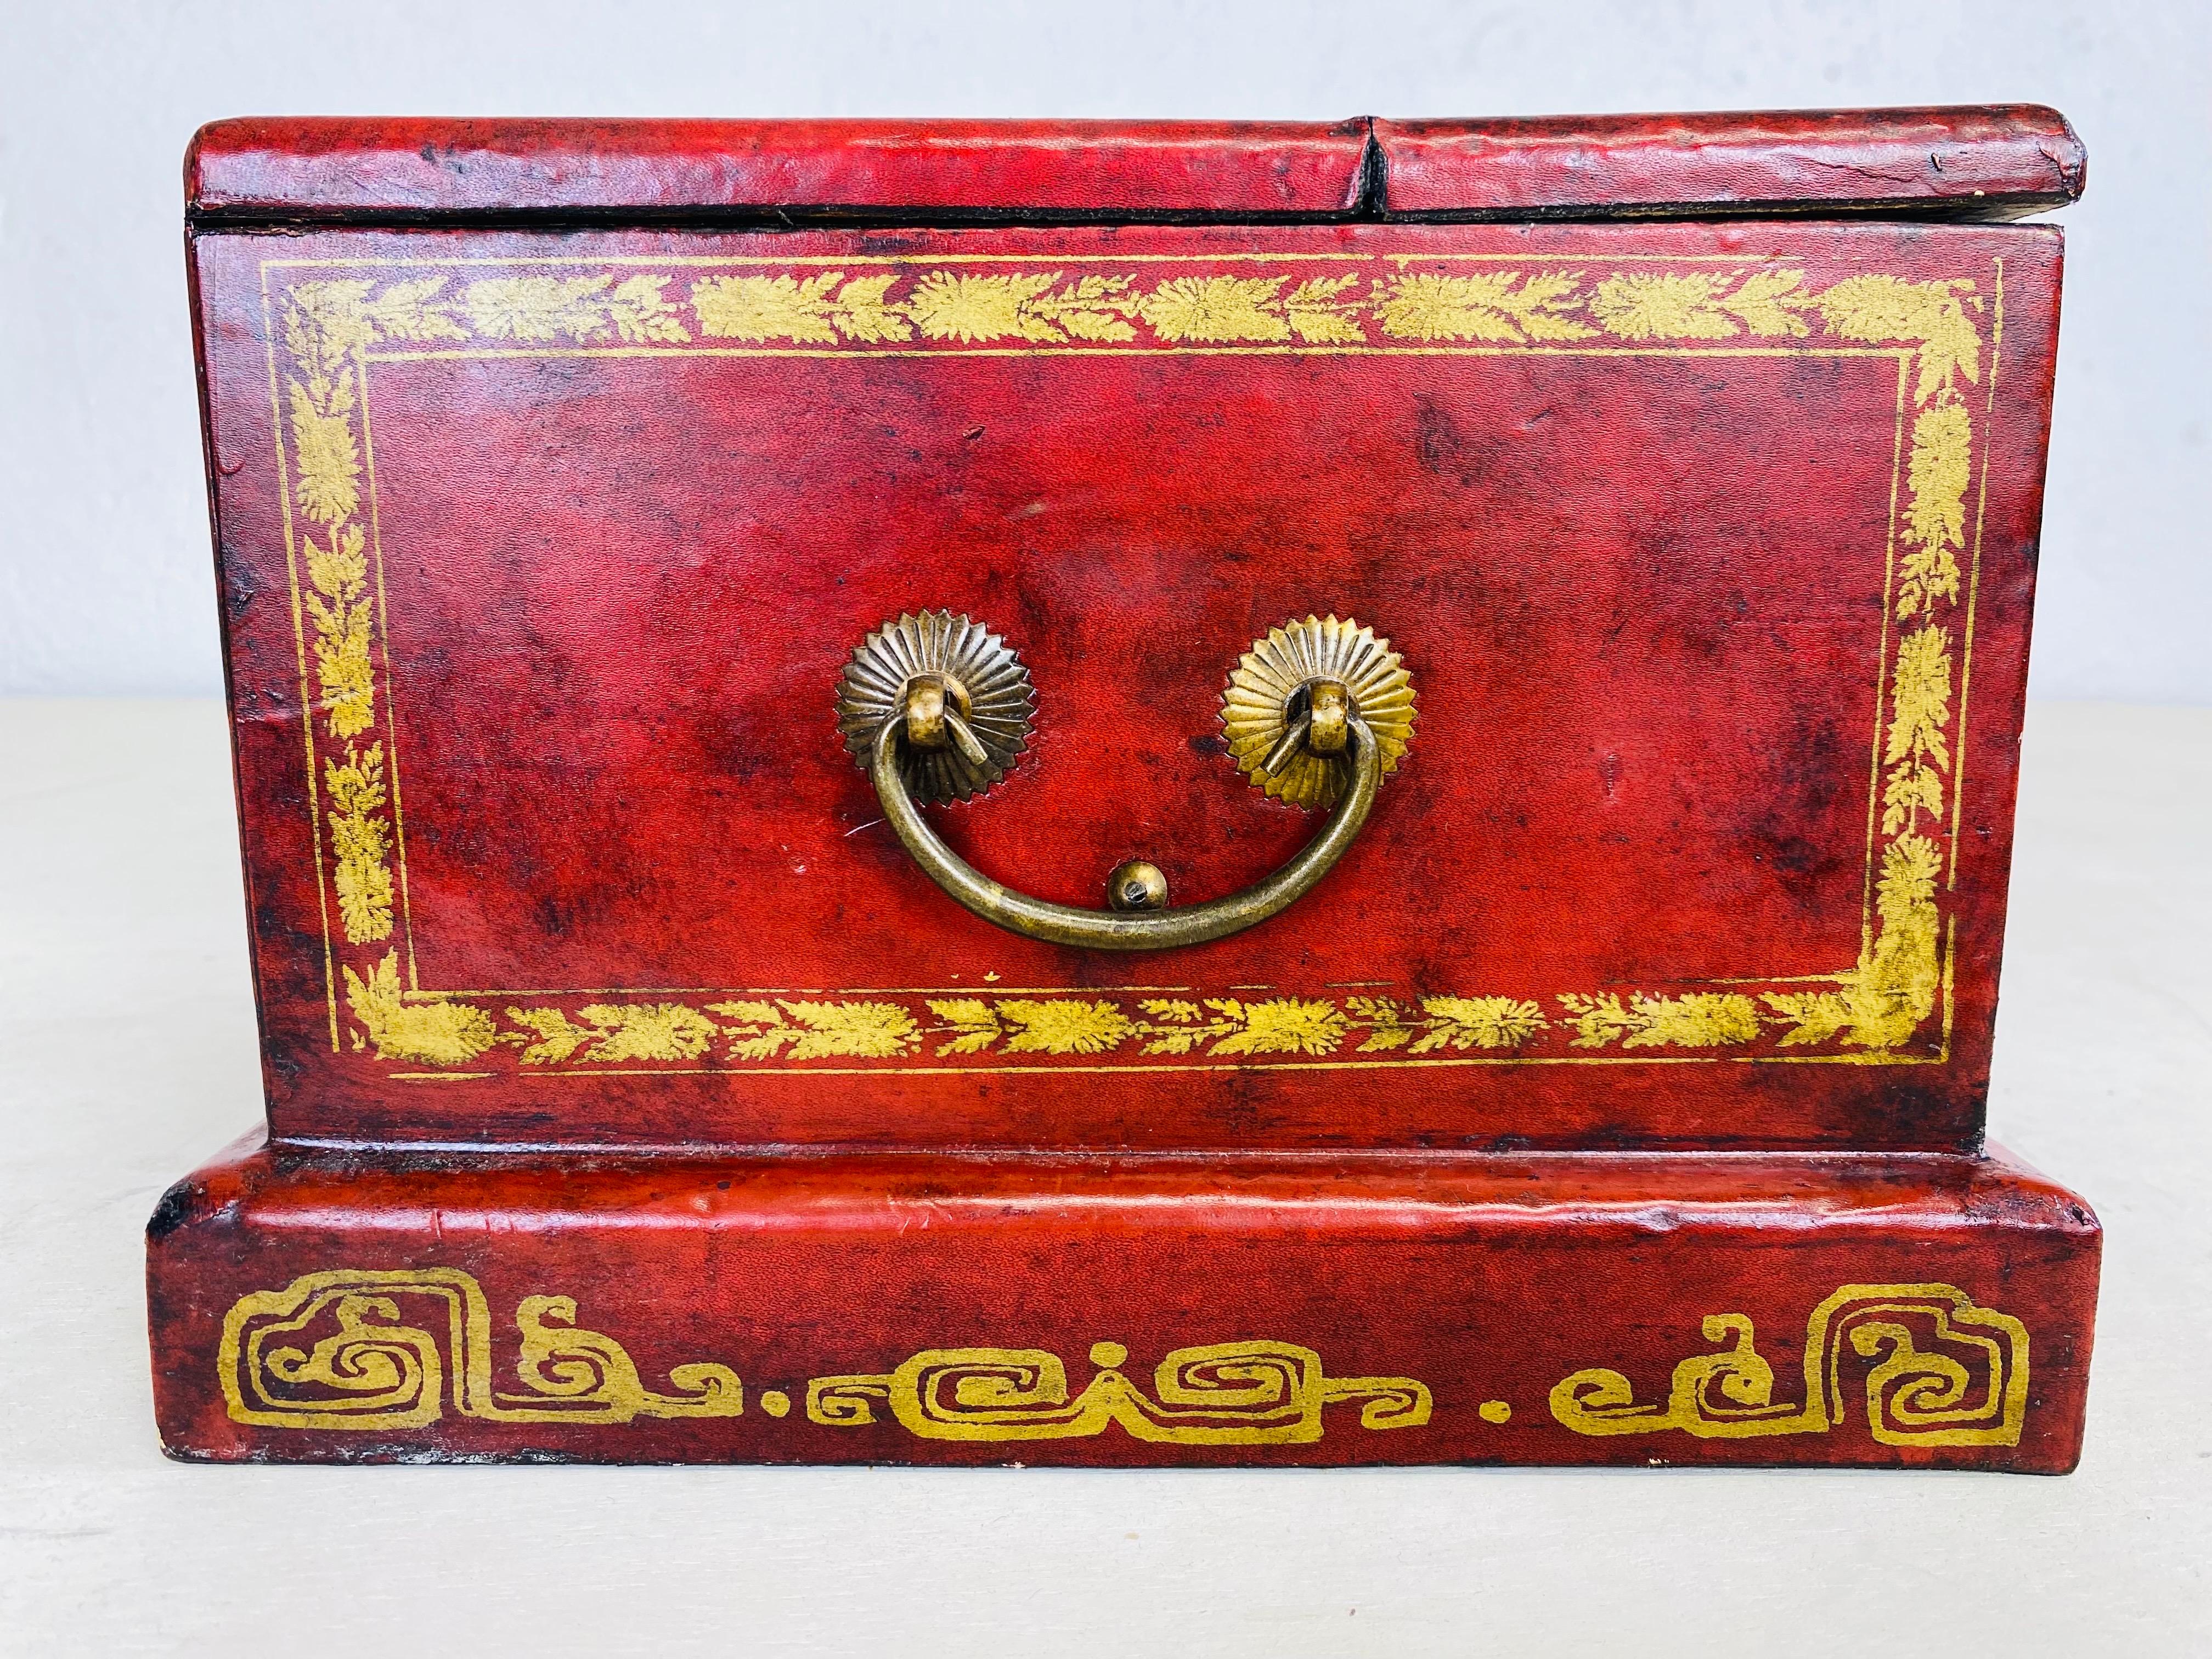 This is a vintage hand painted leather clad dresser box. This dresser box was handmade in Canton China. This box has two small drawers at the front and a lid that opens up and presents a dressing mirror. This box was made in China circa 1990.